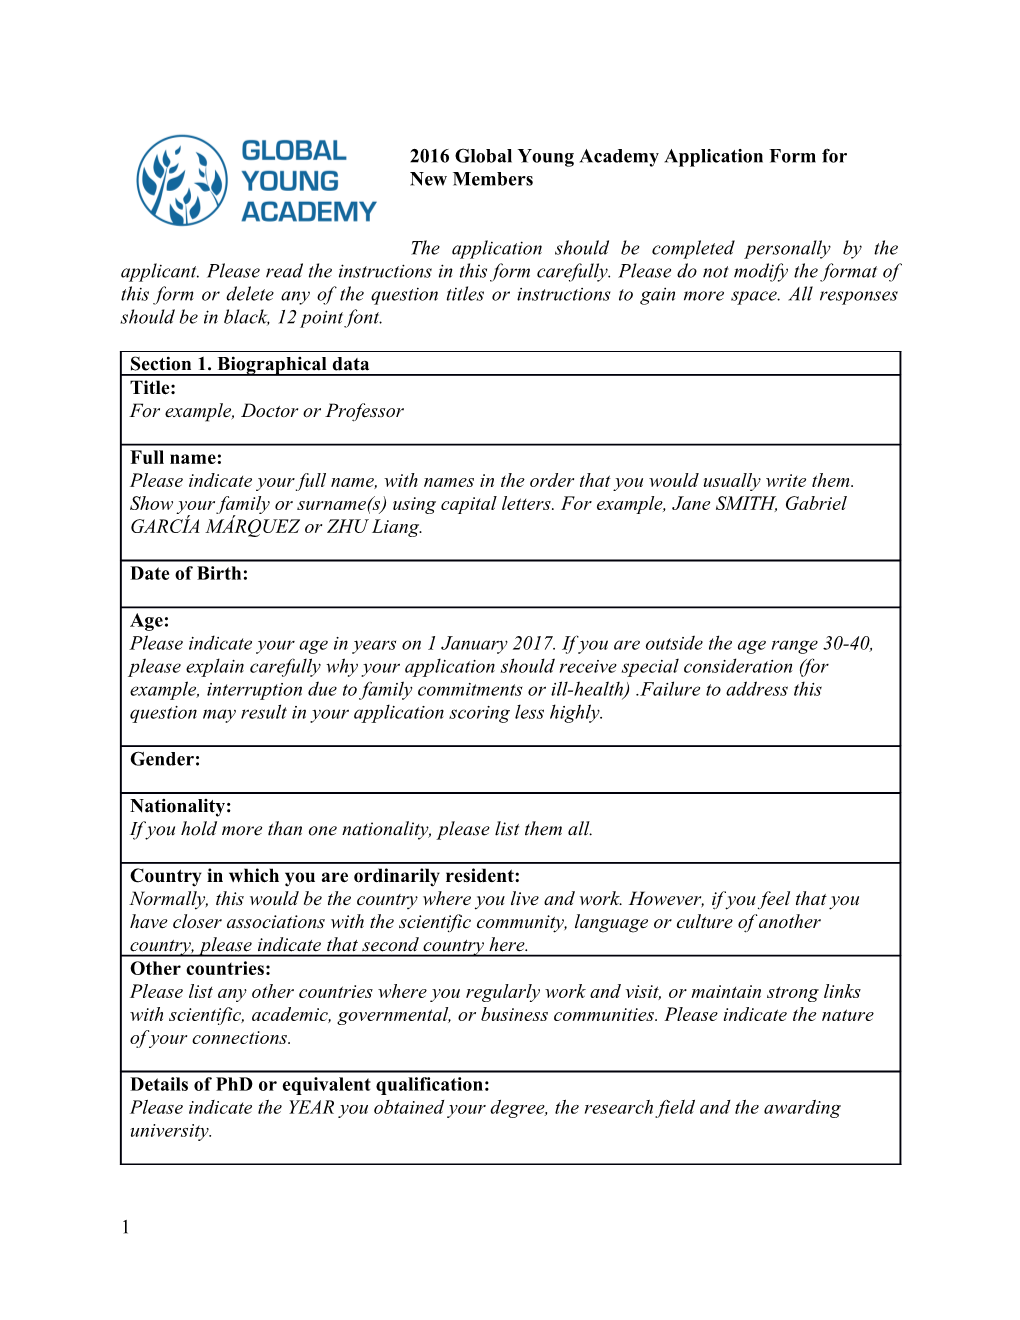 2016 Global Young Academy Application Form for New Members